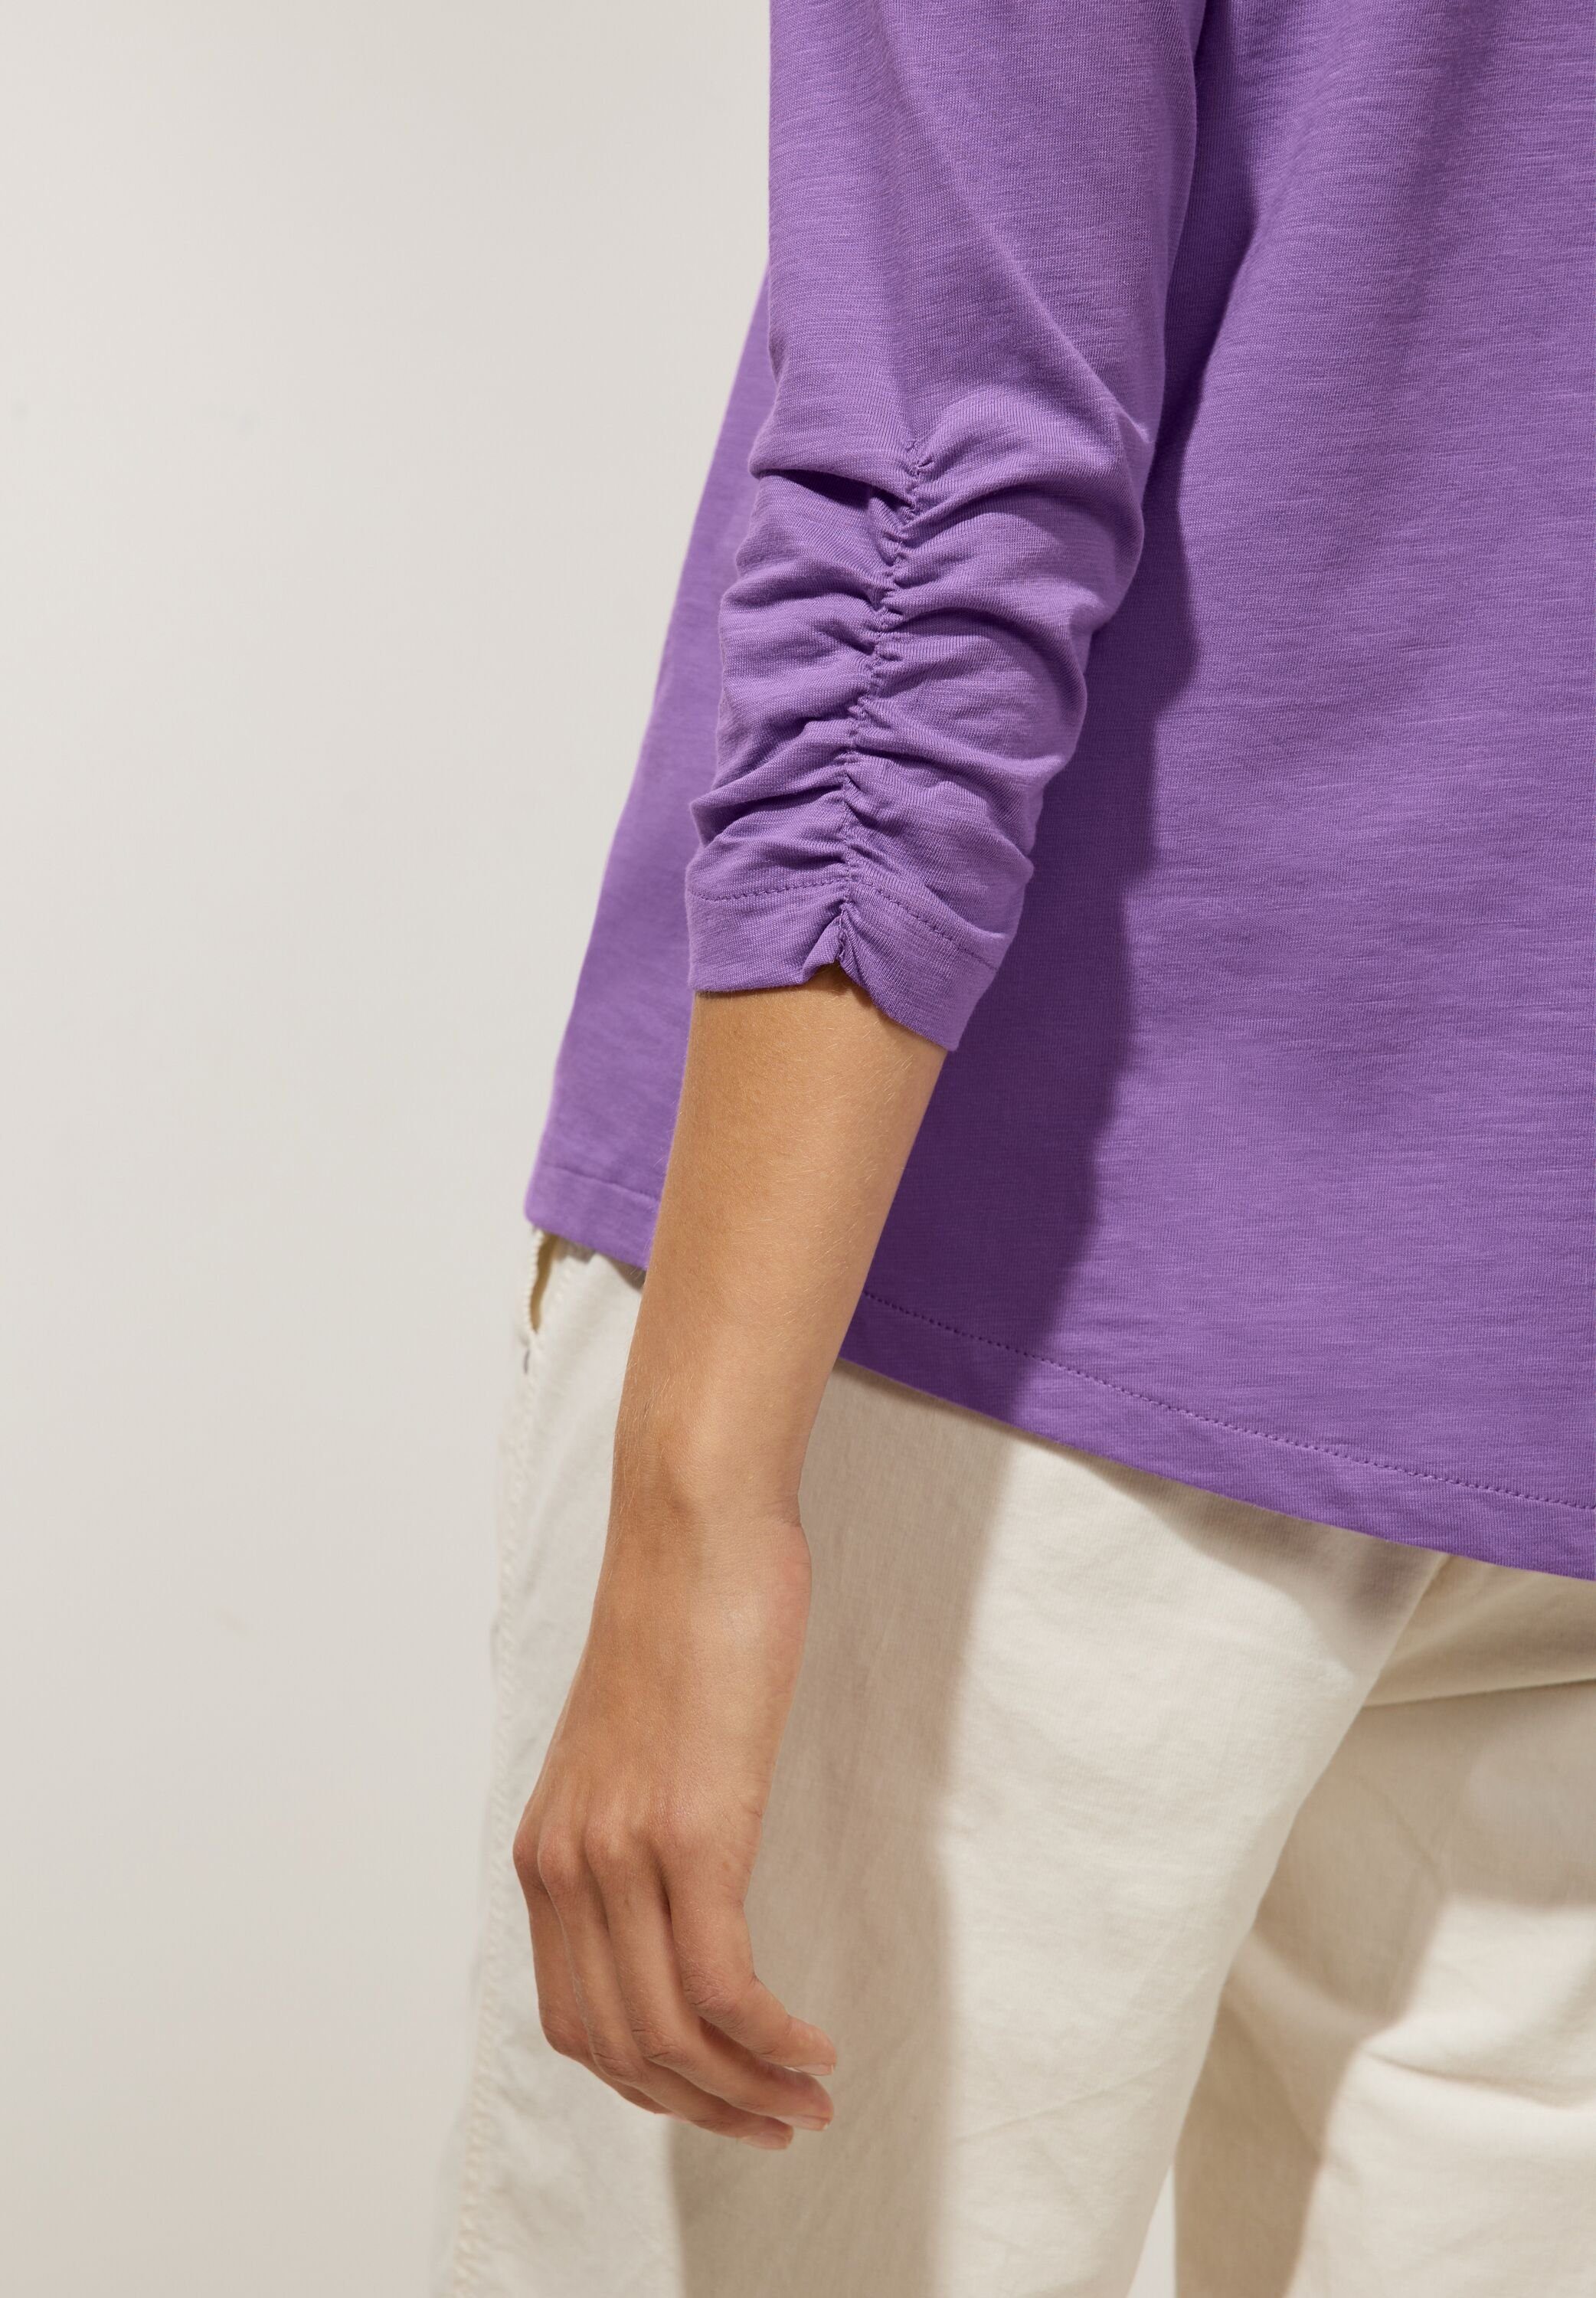 STREET ONE 3/4-Arm-Shirt in lupine Unifarbe lilac